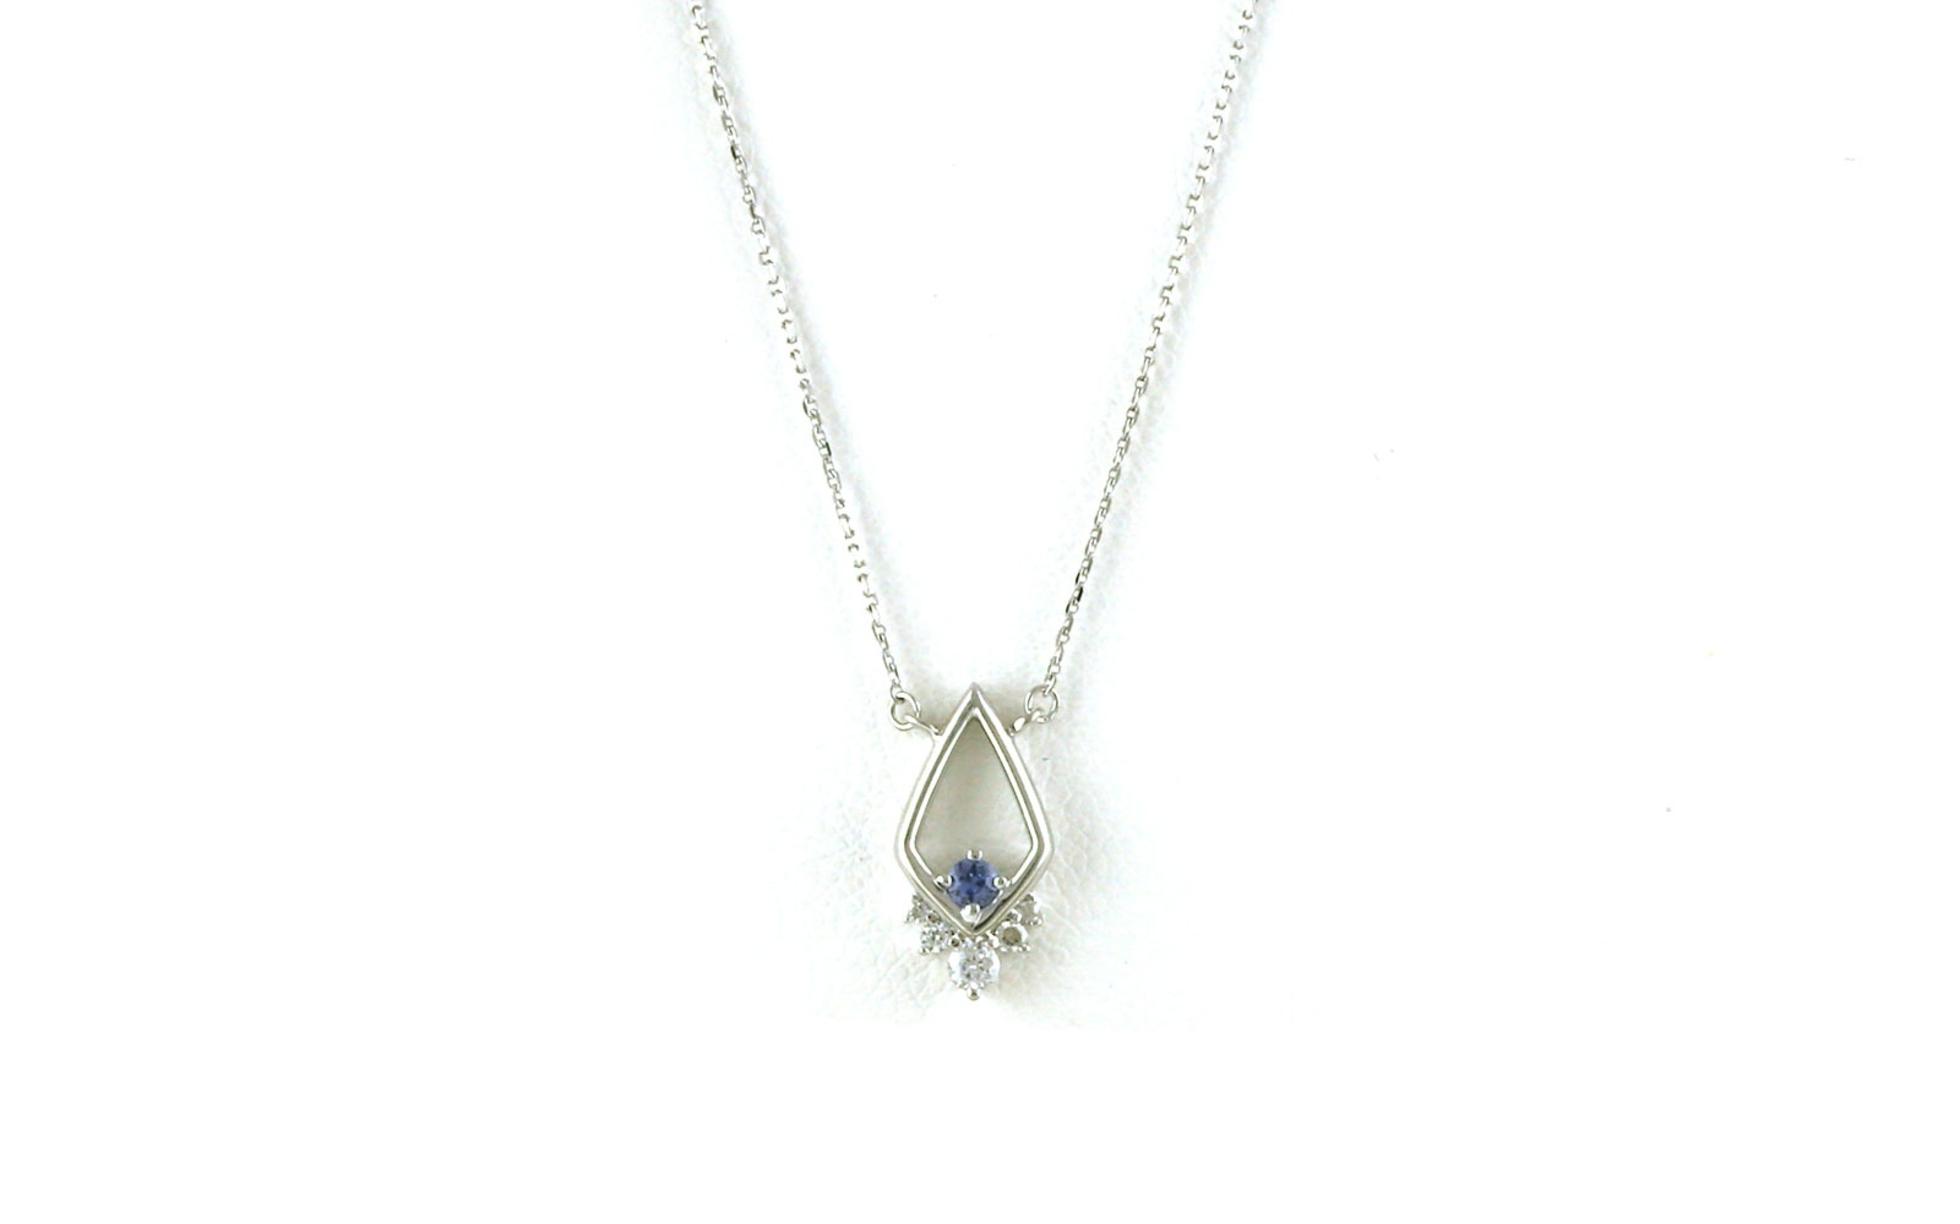 Elongated Kite Montana Yogo Sapphire and Diamond Necklace in White Gold (0.11cts TWT)